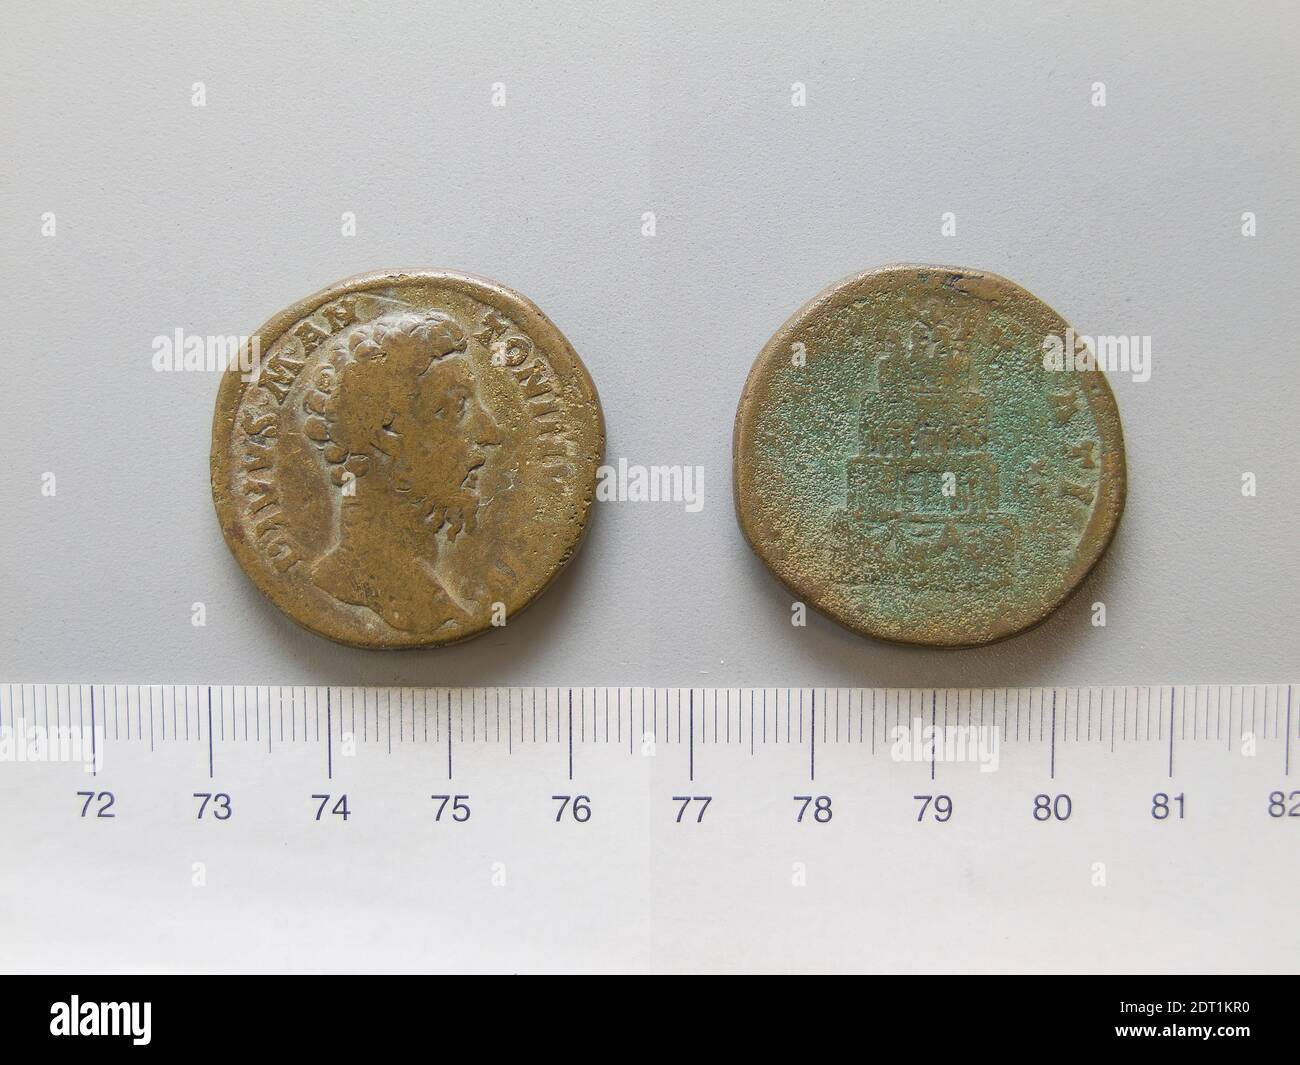 Ruler: Commodus, Emperor of Rome, A.D. 161–192, ruled 180–92, Mint: Rome, Honorand: Marcus Aurelius, Emperor of Rome, A.D. 121–180, ruled  A.D. 161–80, Sestertius of Commodus, Emperor of Rome from Rome, 180, Orichalcum, 26.23 g, 6:00, 32.8 mm, Made in Rome, Italy, Roman, 2nd century, Numismatics Stock Photo